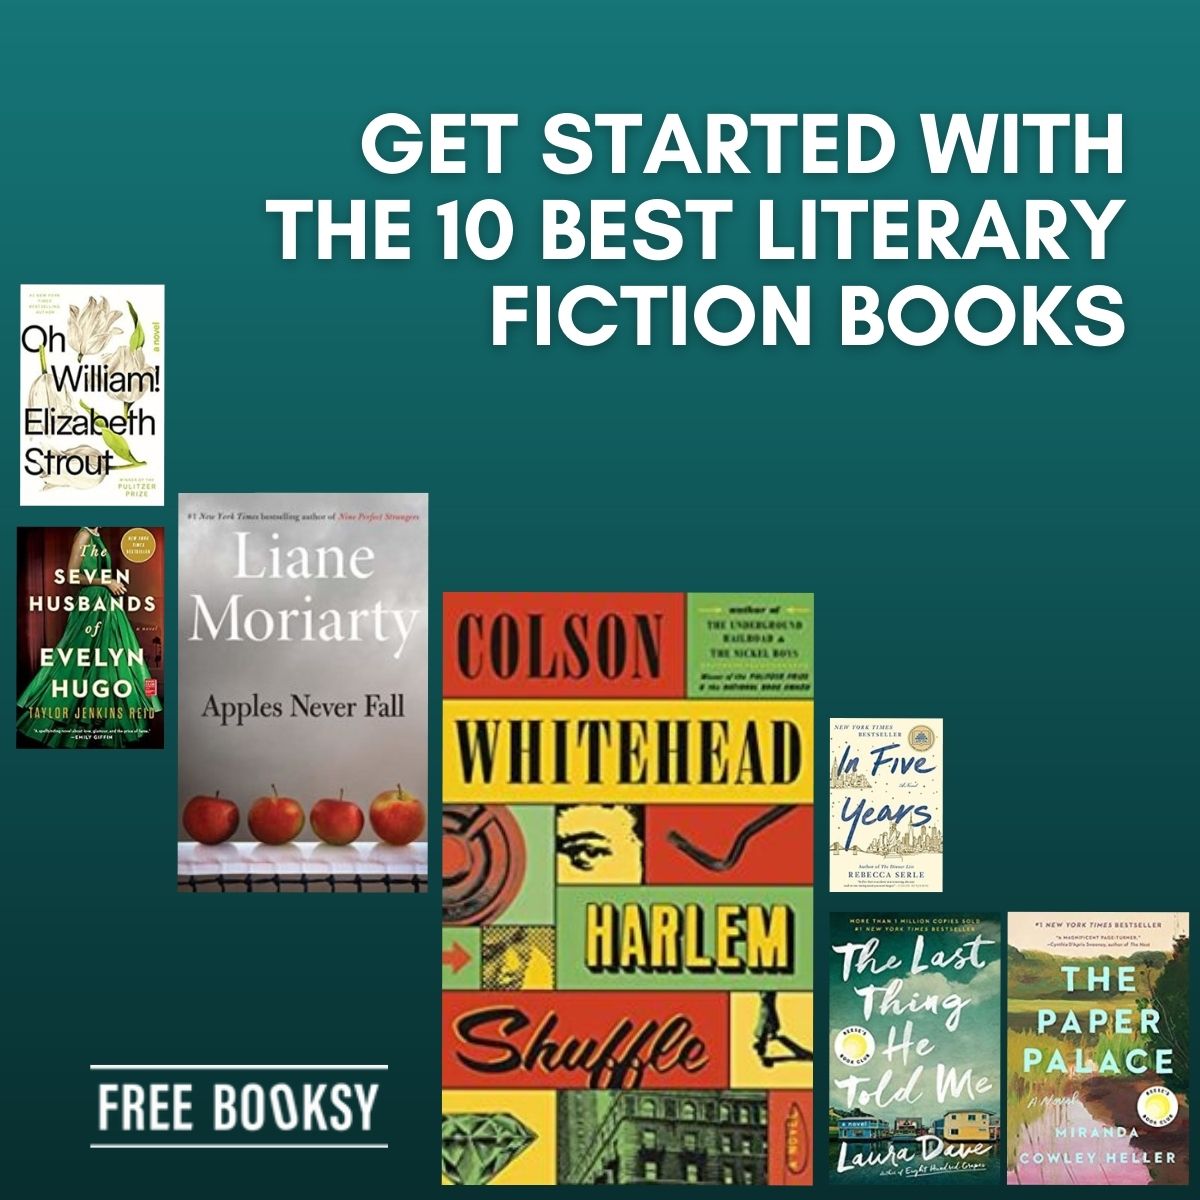 Get Started with the 10 Best Literary Fiction Books